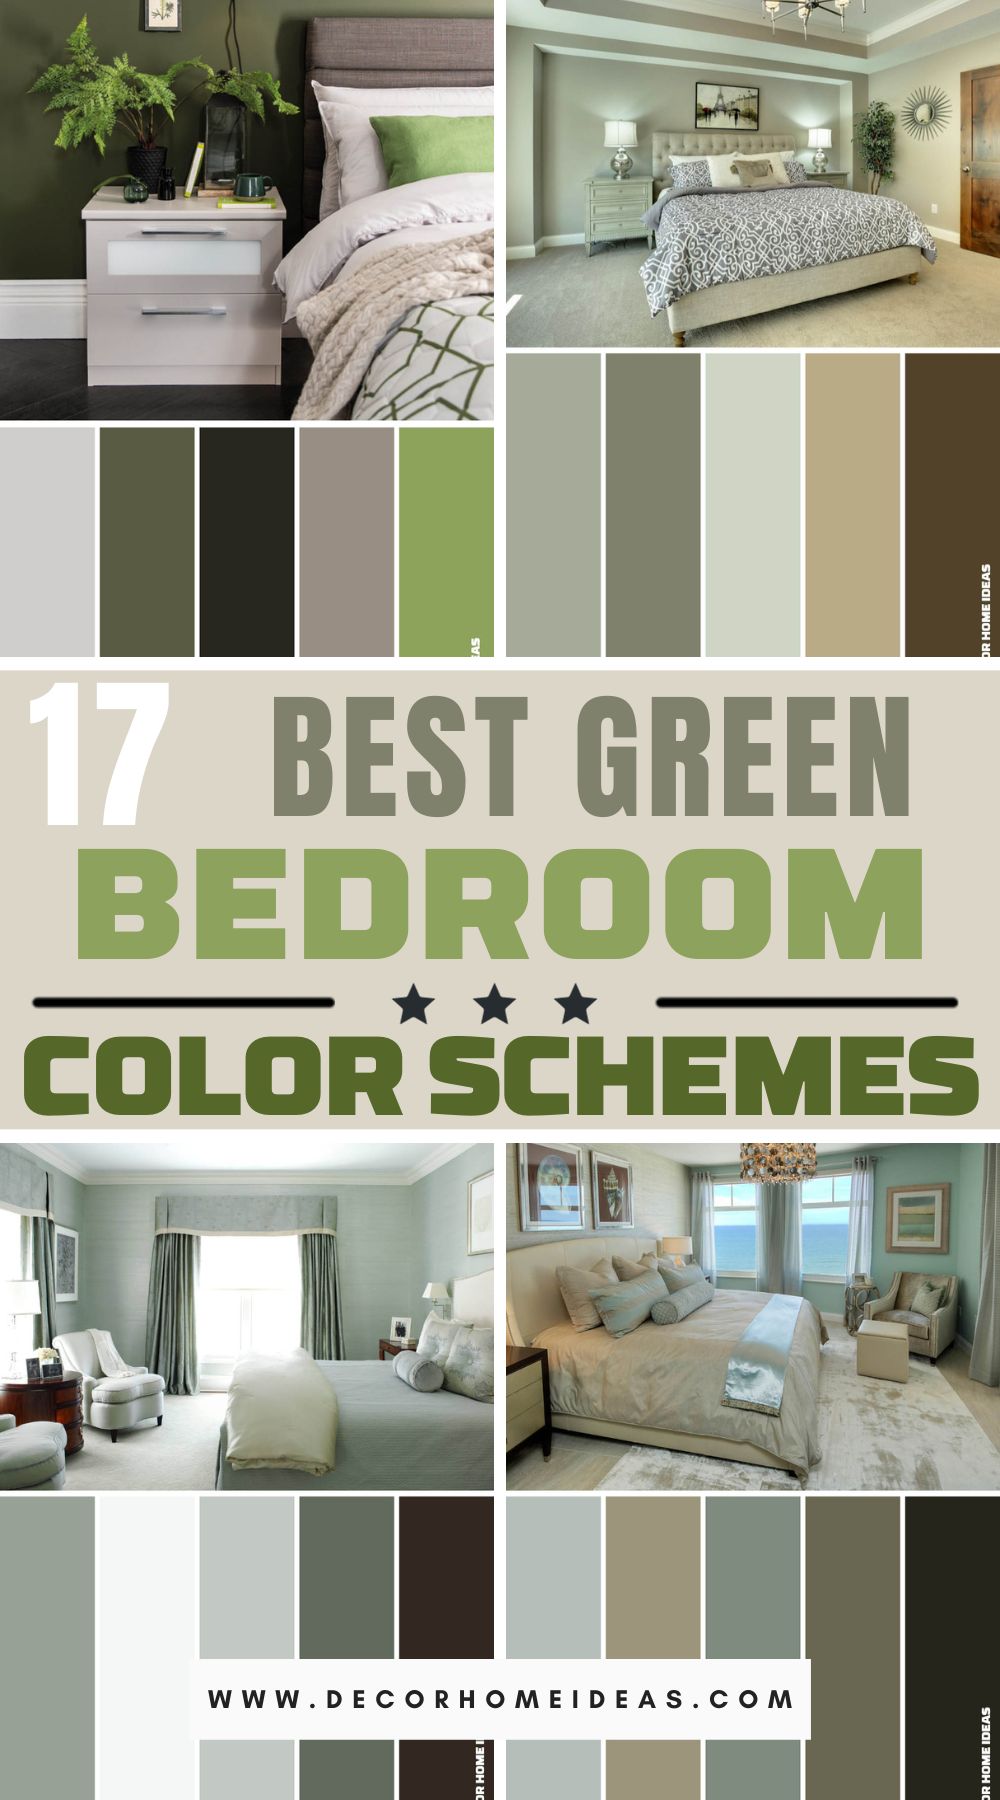 Turn your bedroom into a serene oasis with these 17 fantastic green color schemes. Dive into a world of tranquility and embrace the refreshing allure of green for a peaceful night's rest.